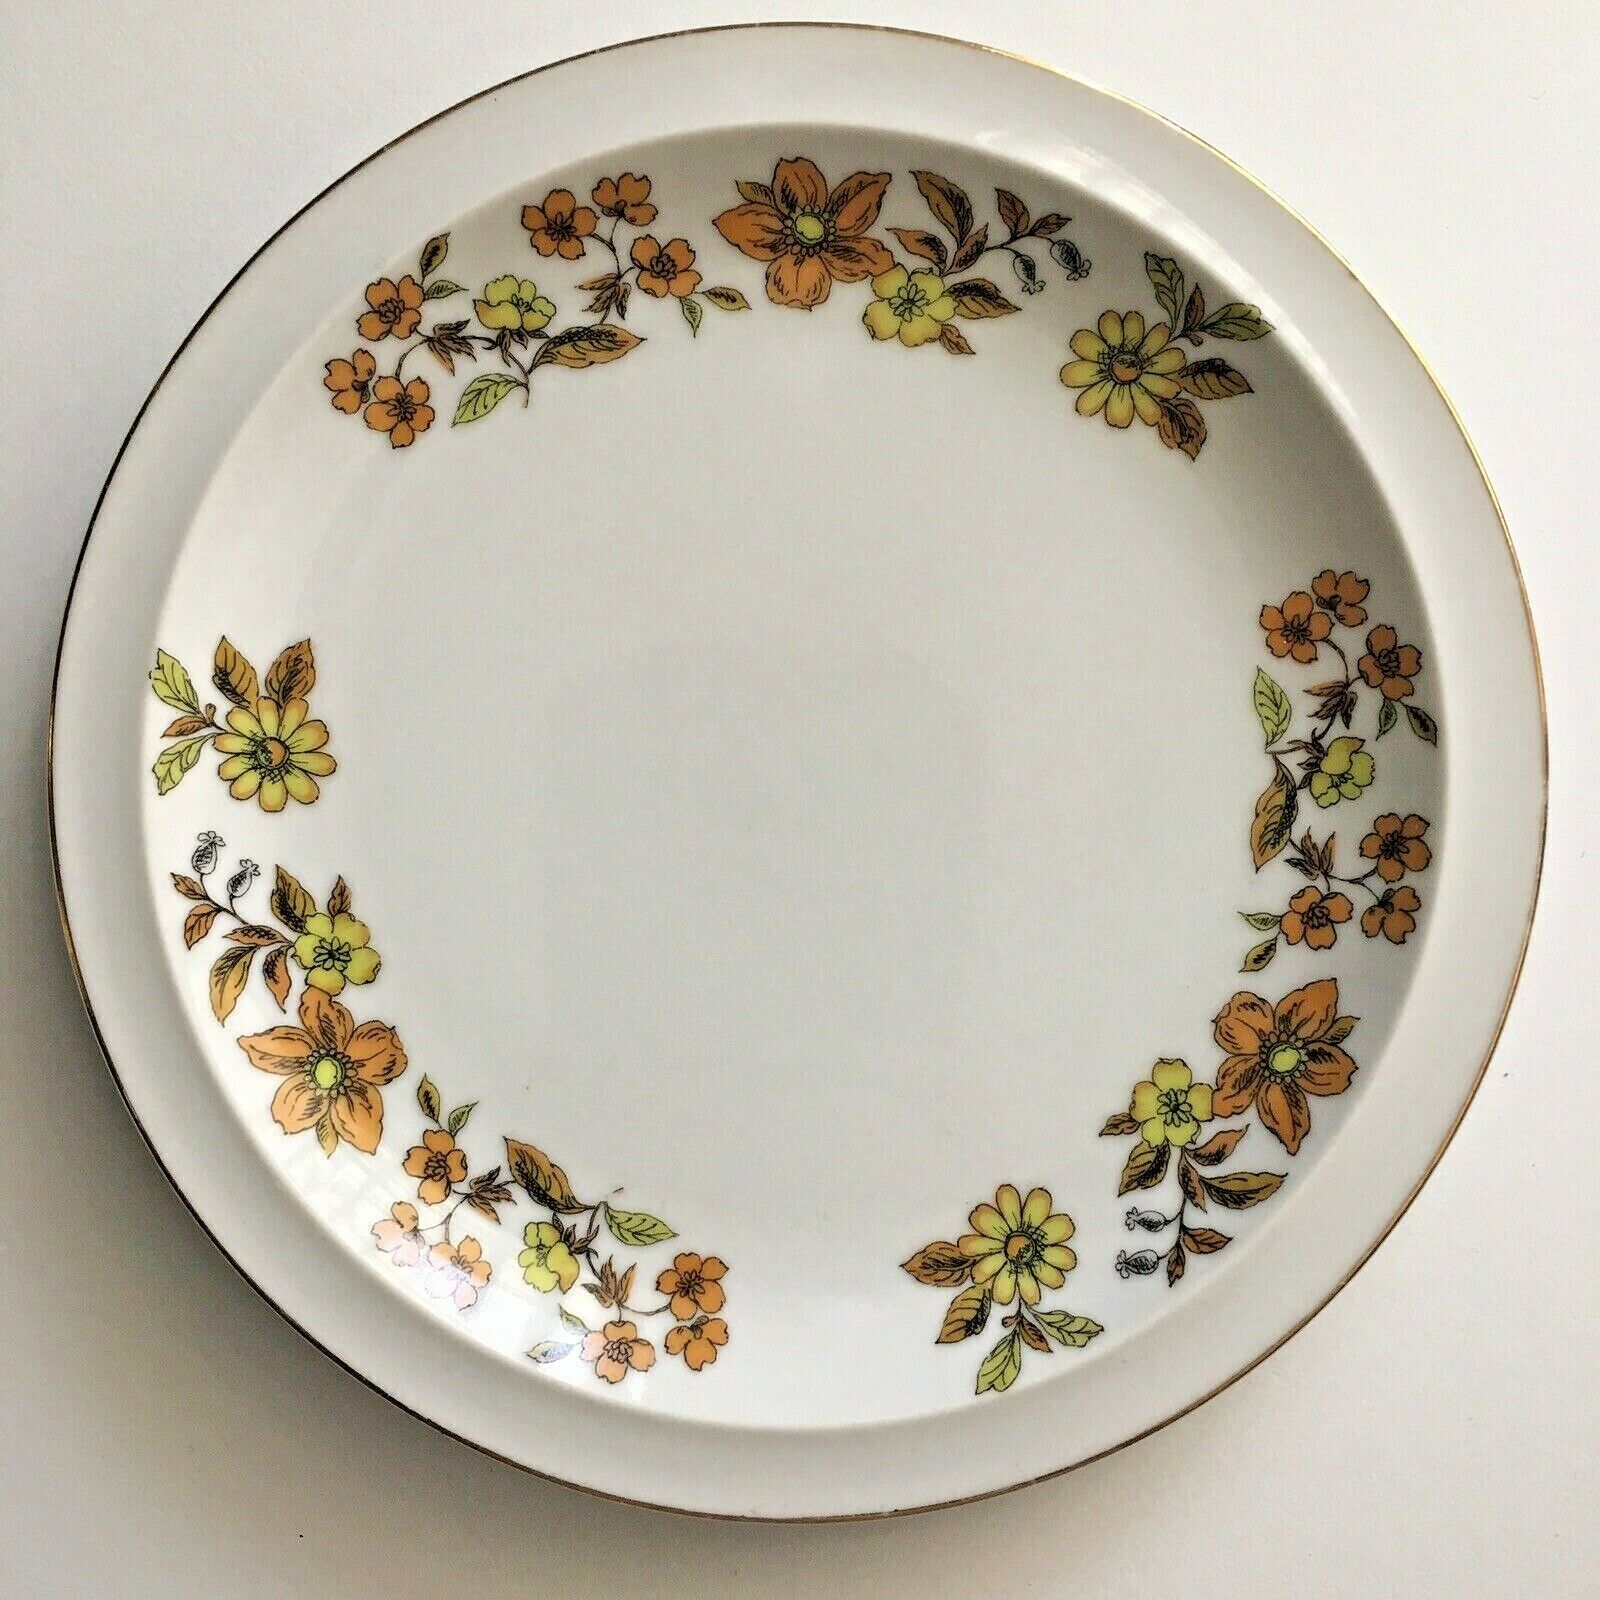 Primary image for Royal Domino AUTUMN SONG Salad/Cake 7.5" Plate S989579G2